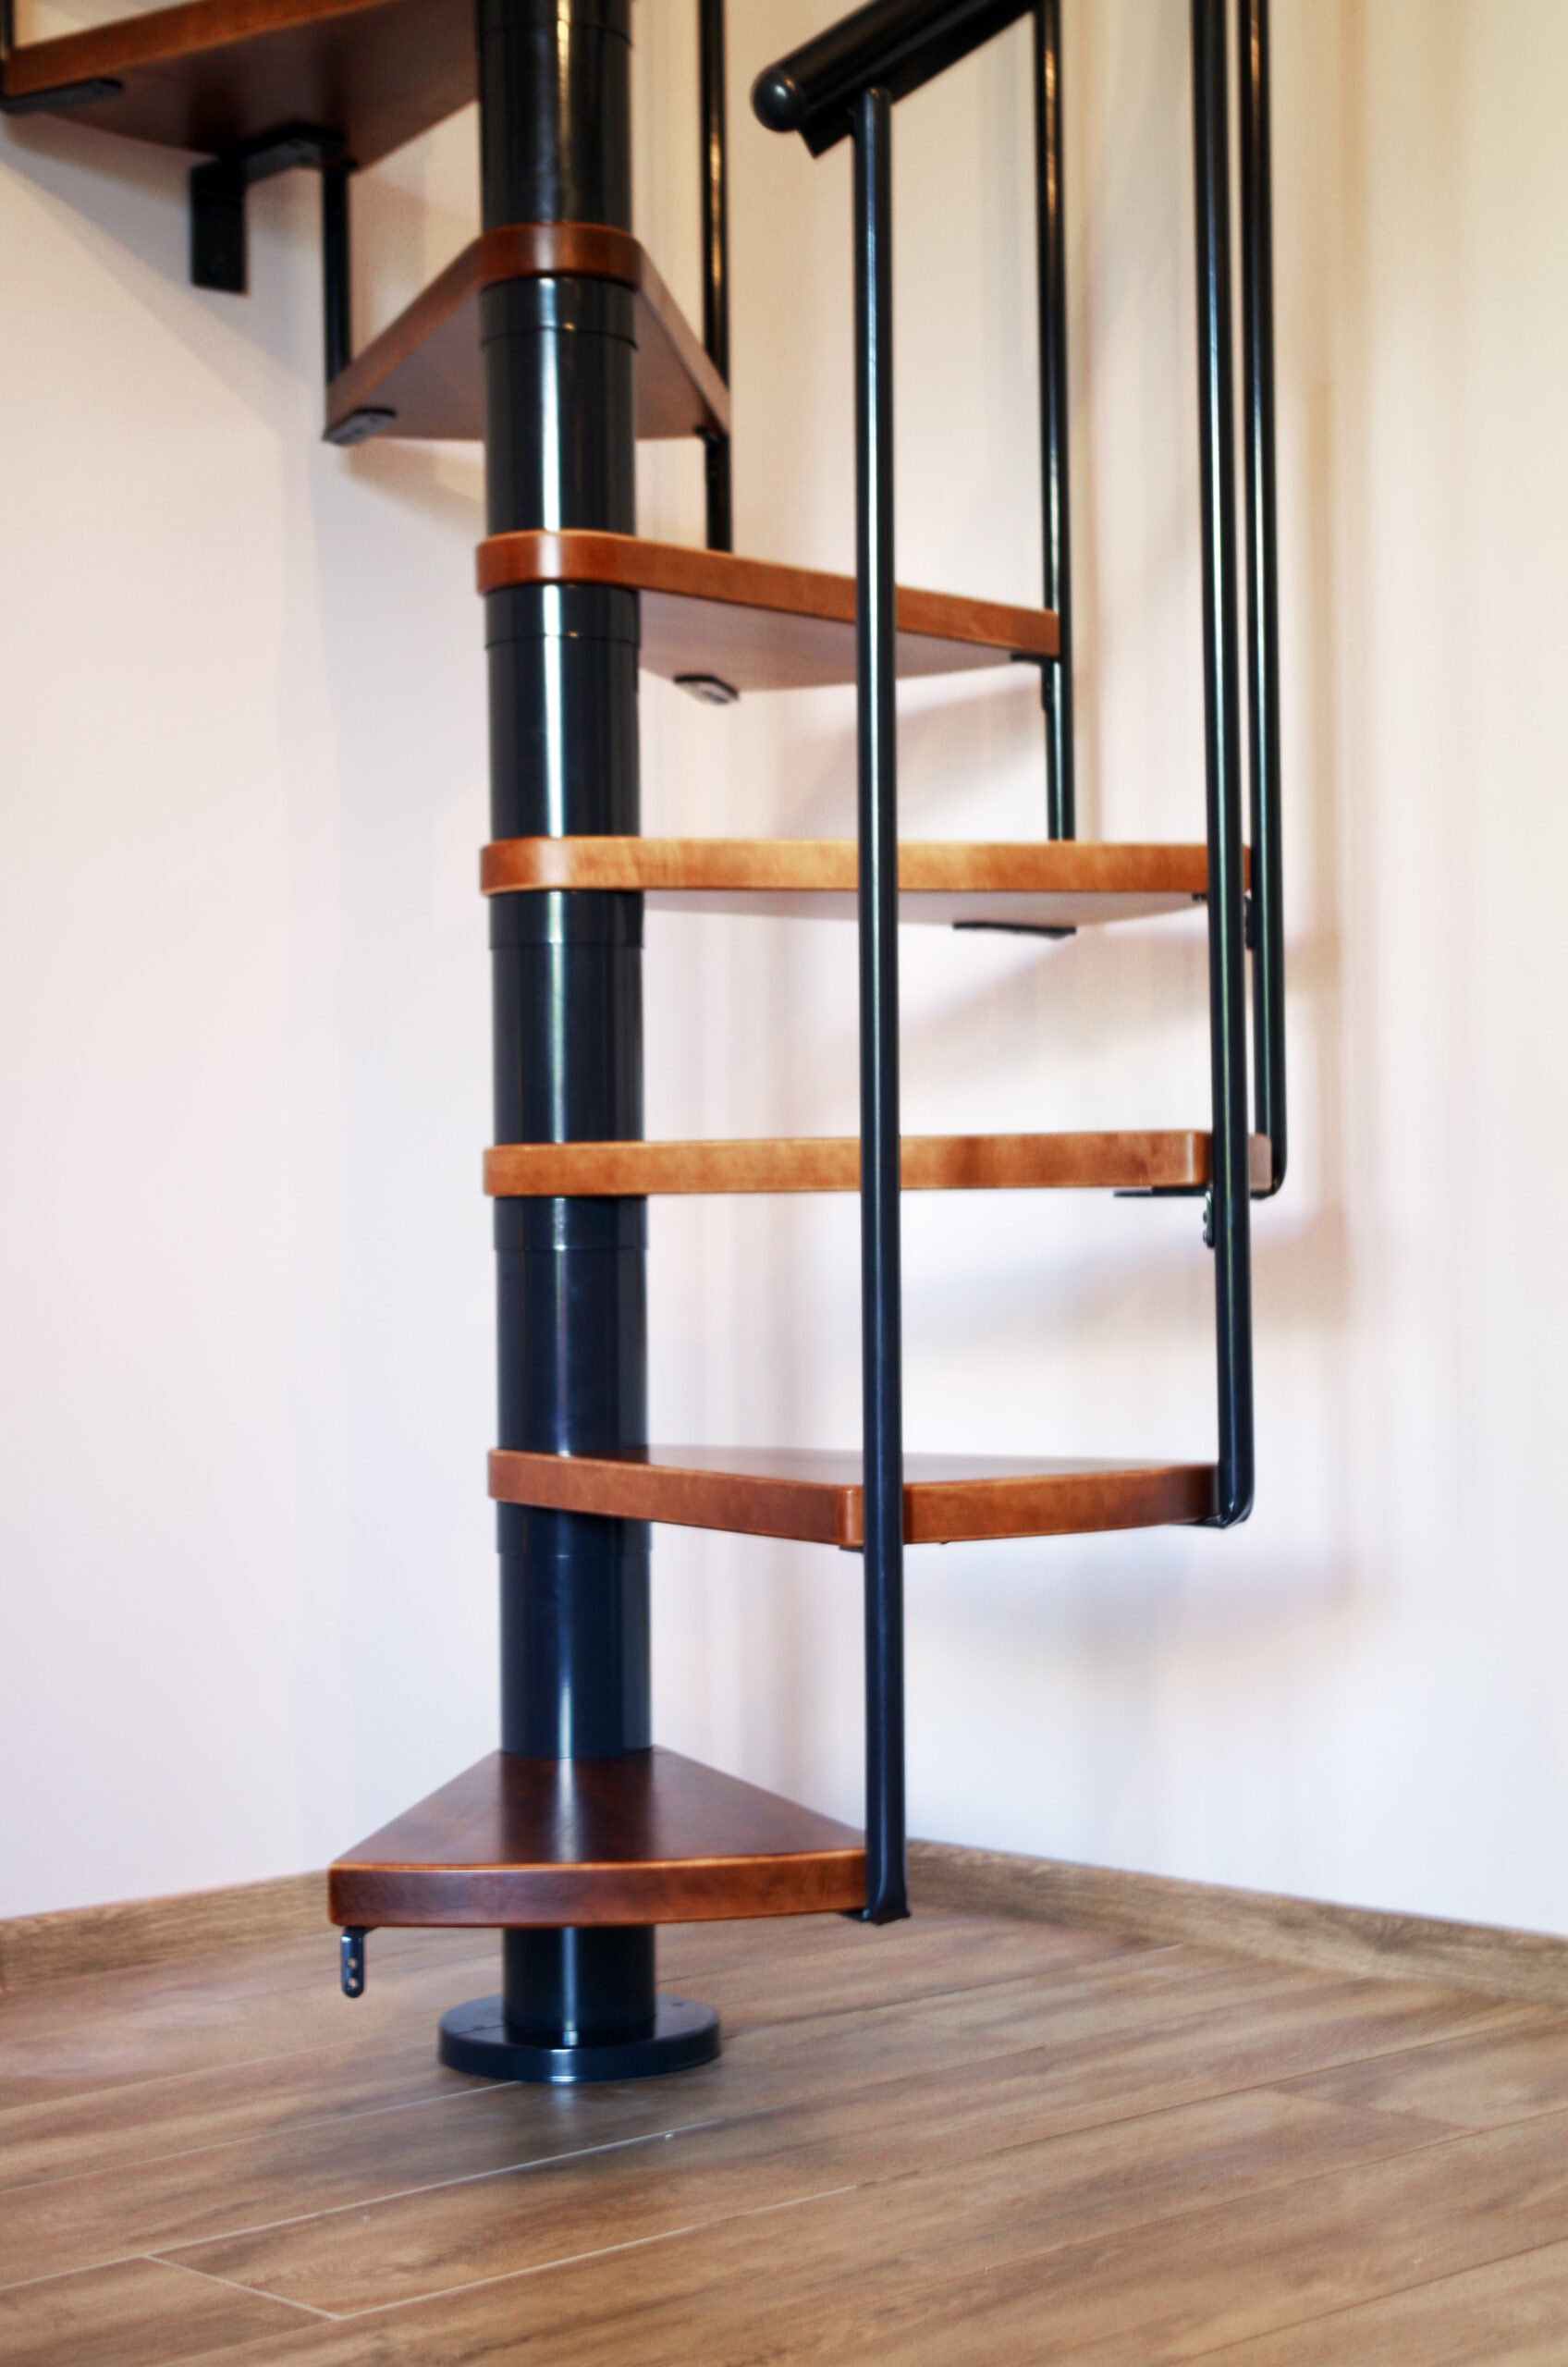 M100 Spiral Staircase Anthracite/Honey Beech 100cm